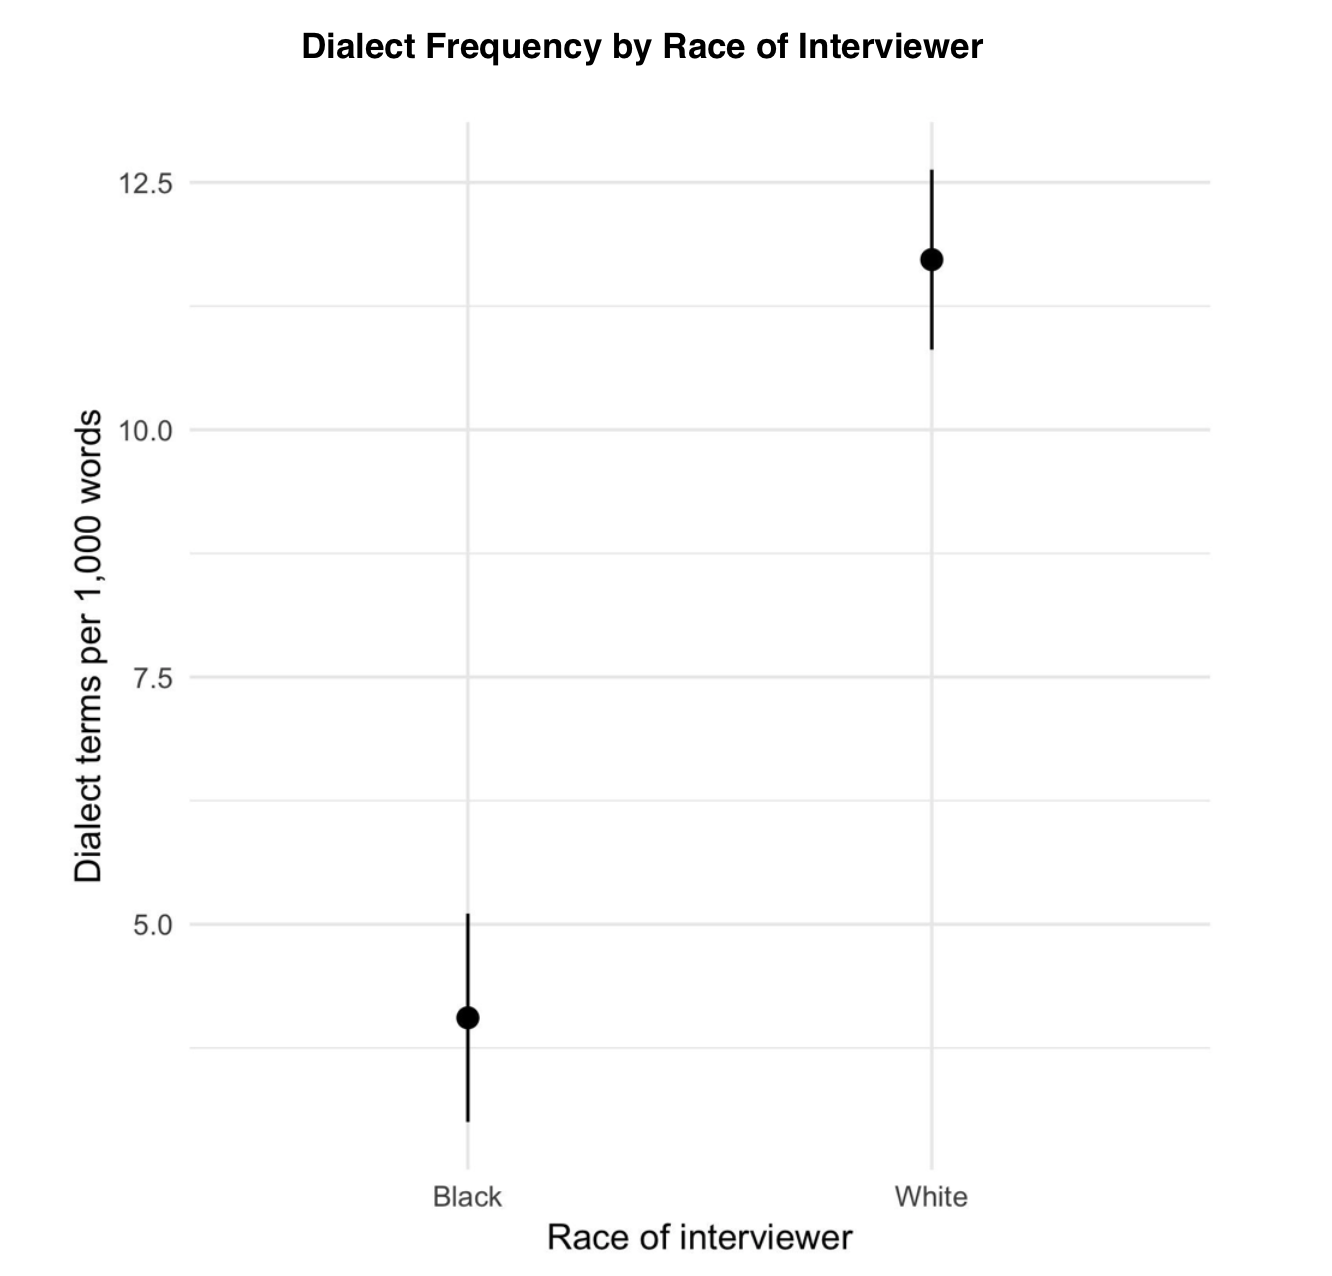 Graph showing the dialect frequency for a black interviewer ranged from approximately two and a half to five occurrences per one thousand words, while the dialect frequency for a white interviewer ranged from approximately eleven to twelve and a half per one thousand words.